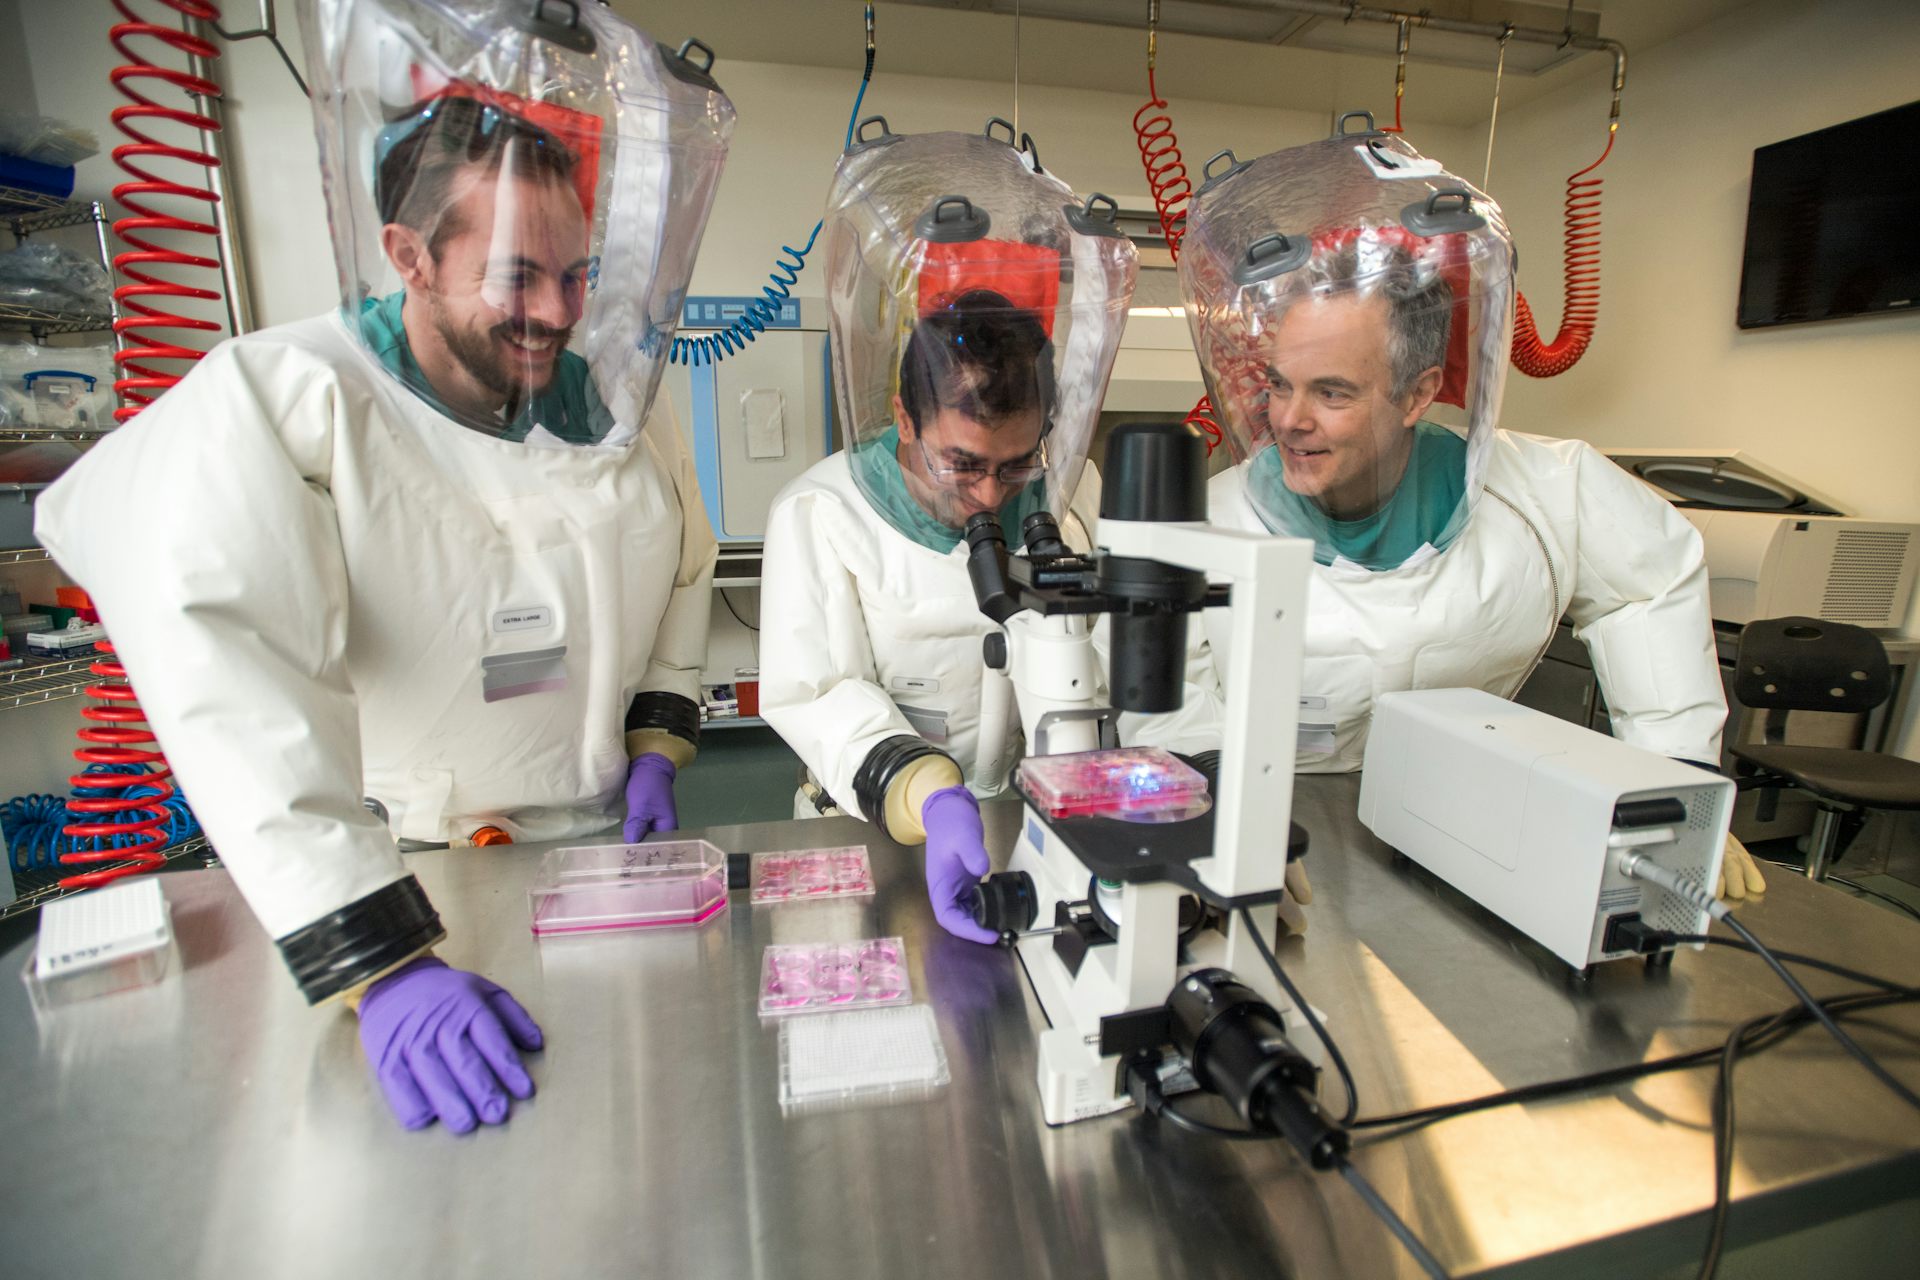 Three scientists in full PPE gather around lab equipment